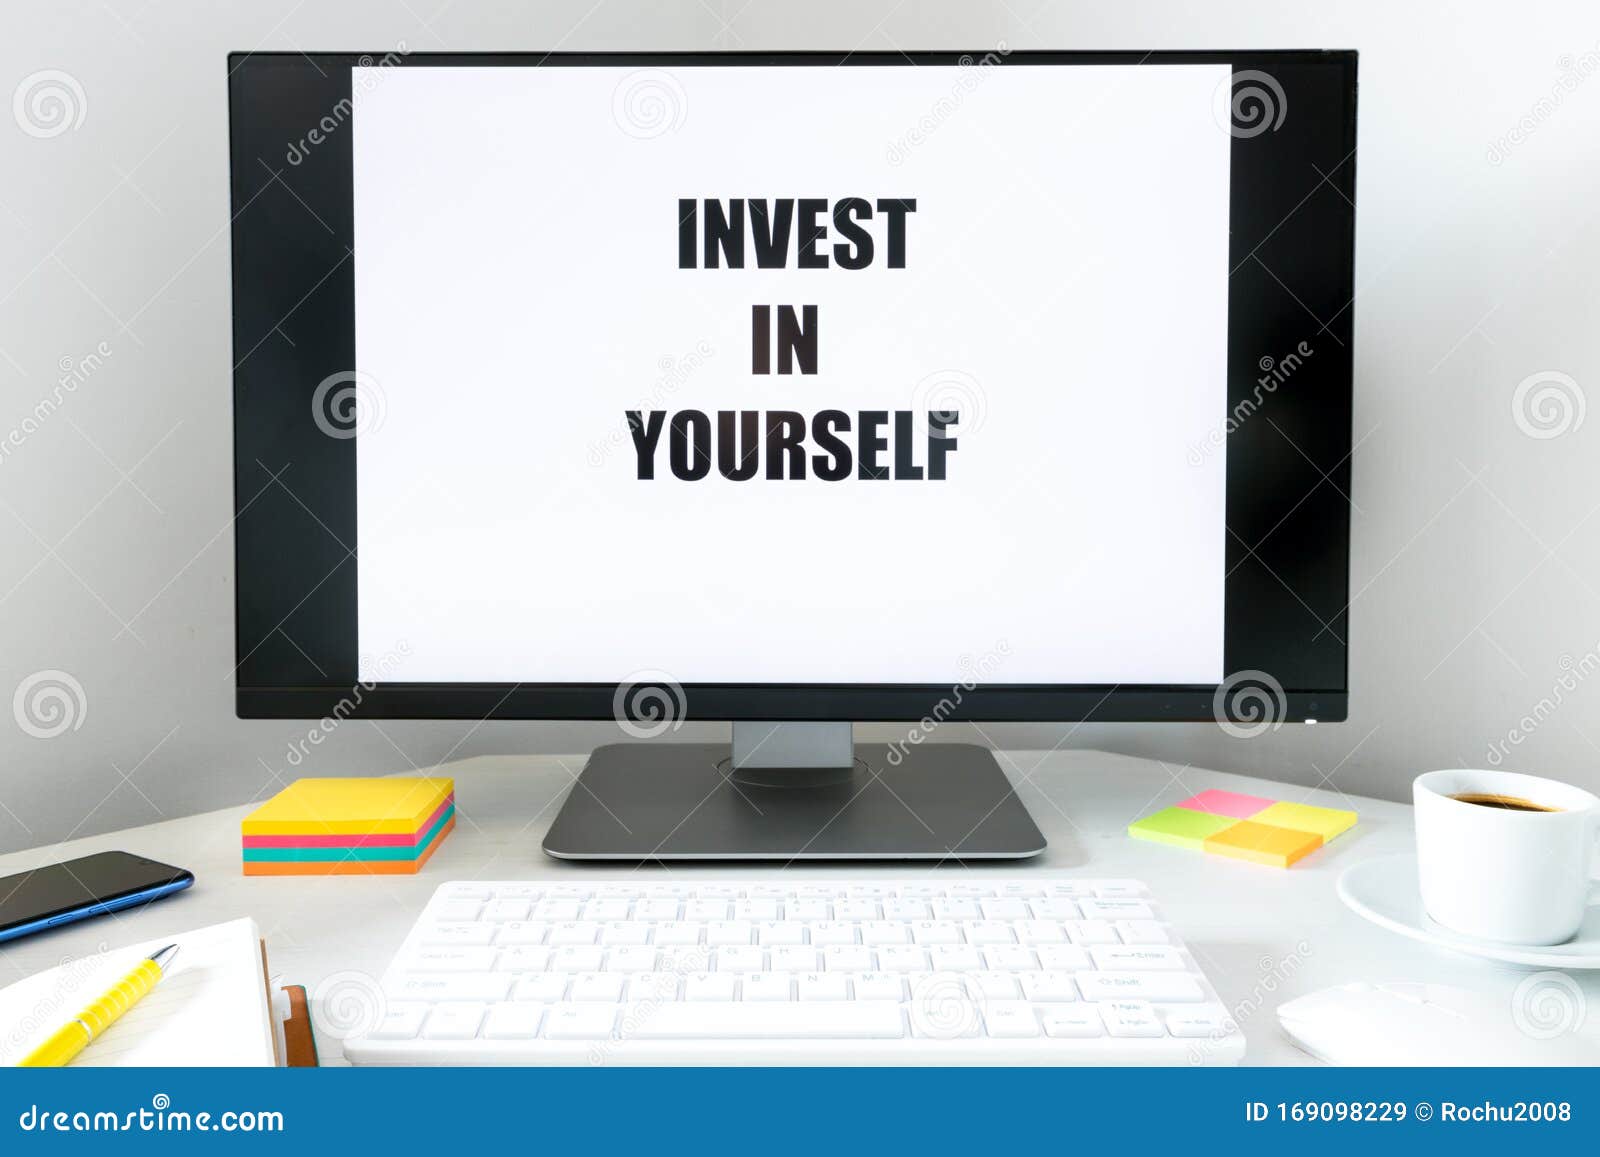 Text Displayed On The Monitor Invest In Yourself A Desk With A